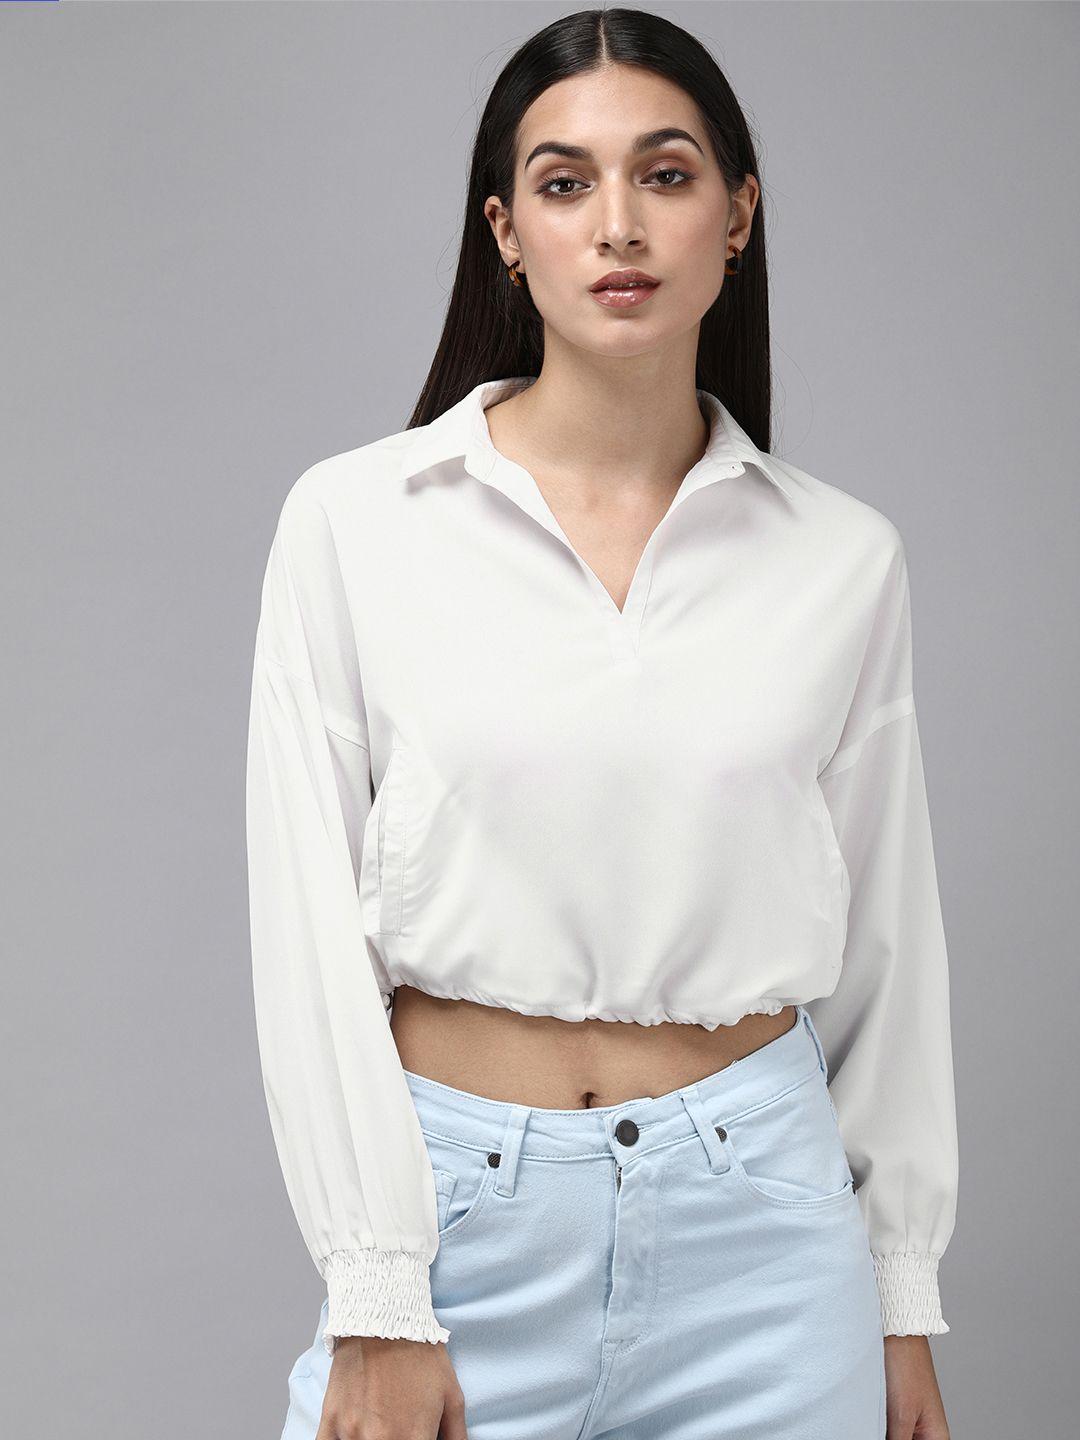 the-roadster-lifestyle-co.-women-white--solid-casual-shirt